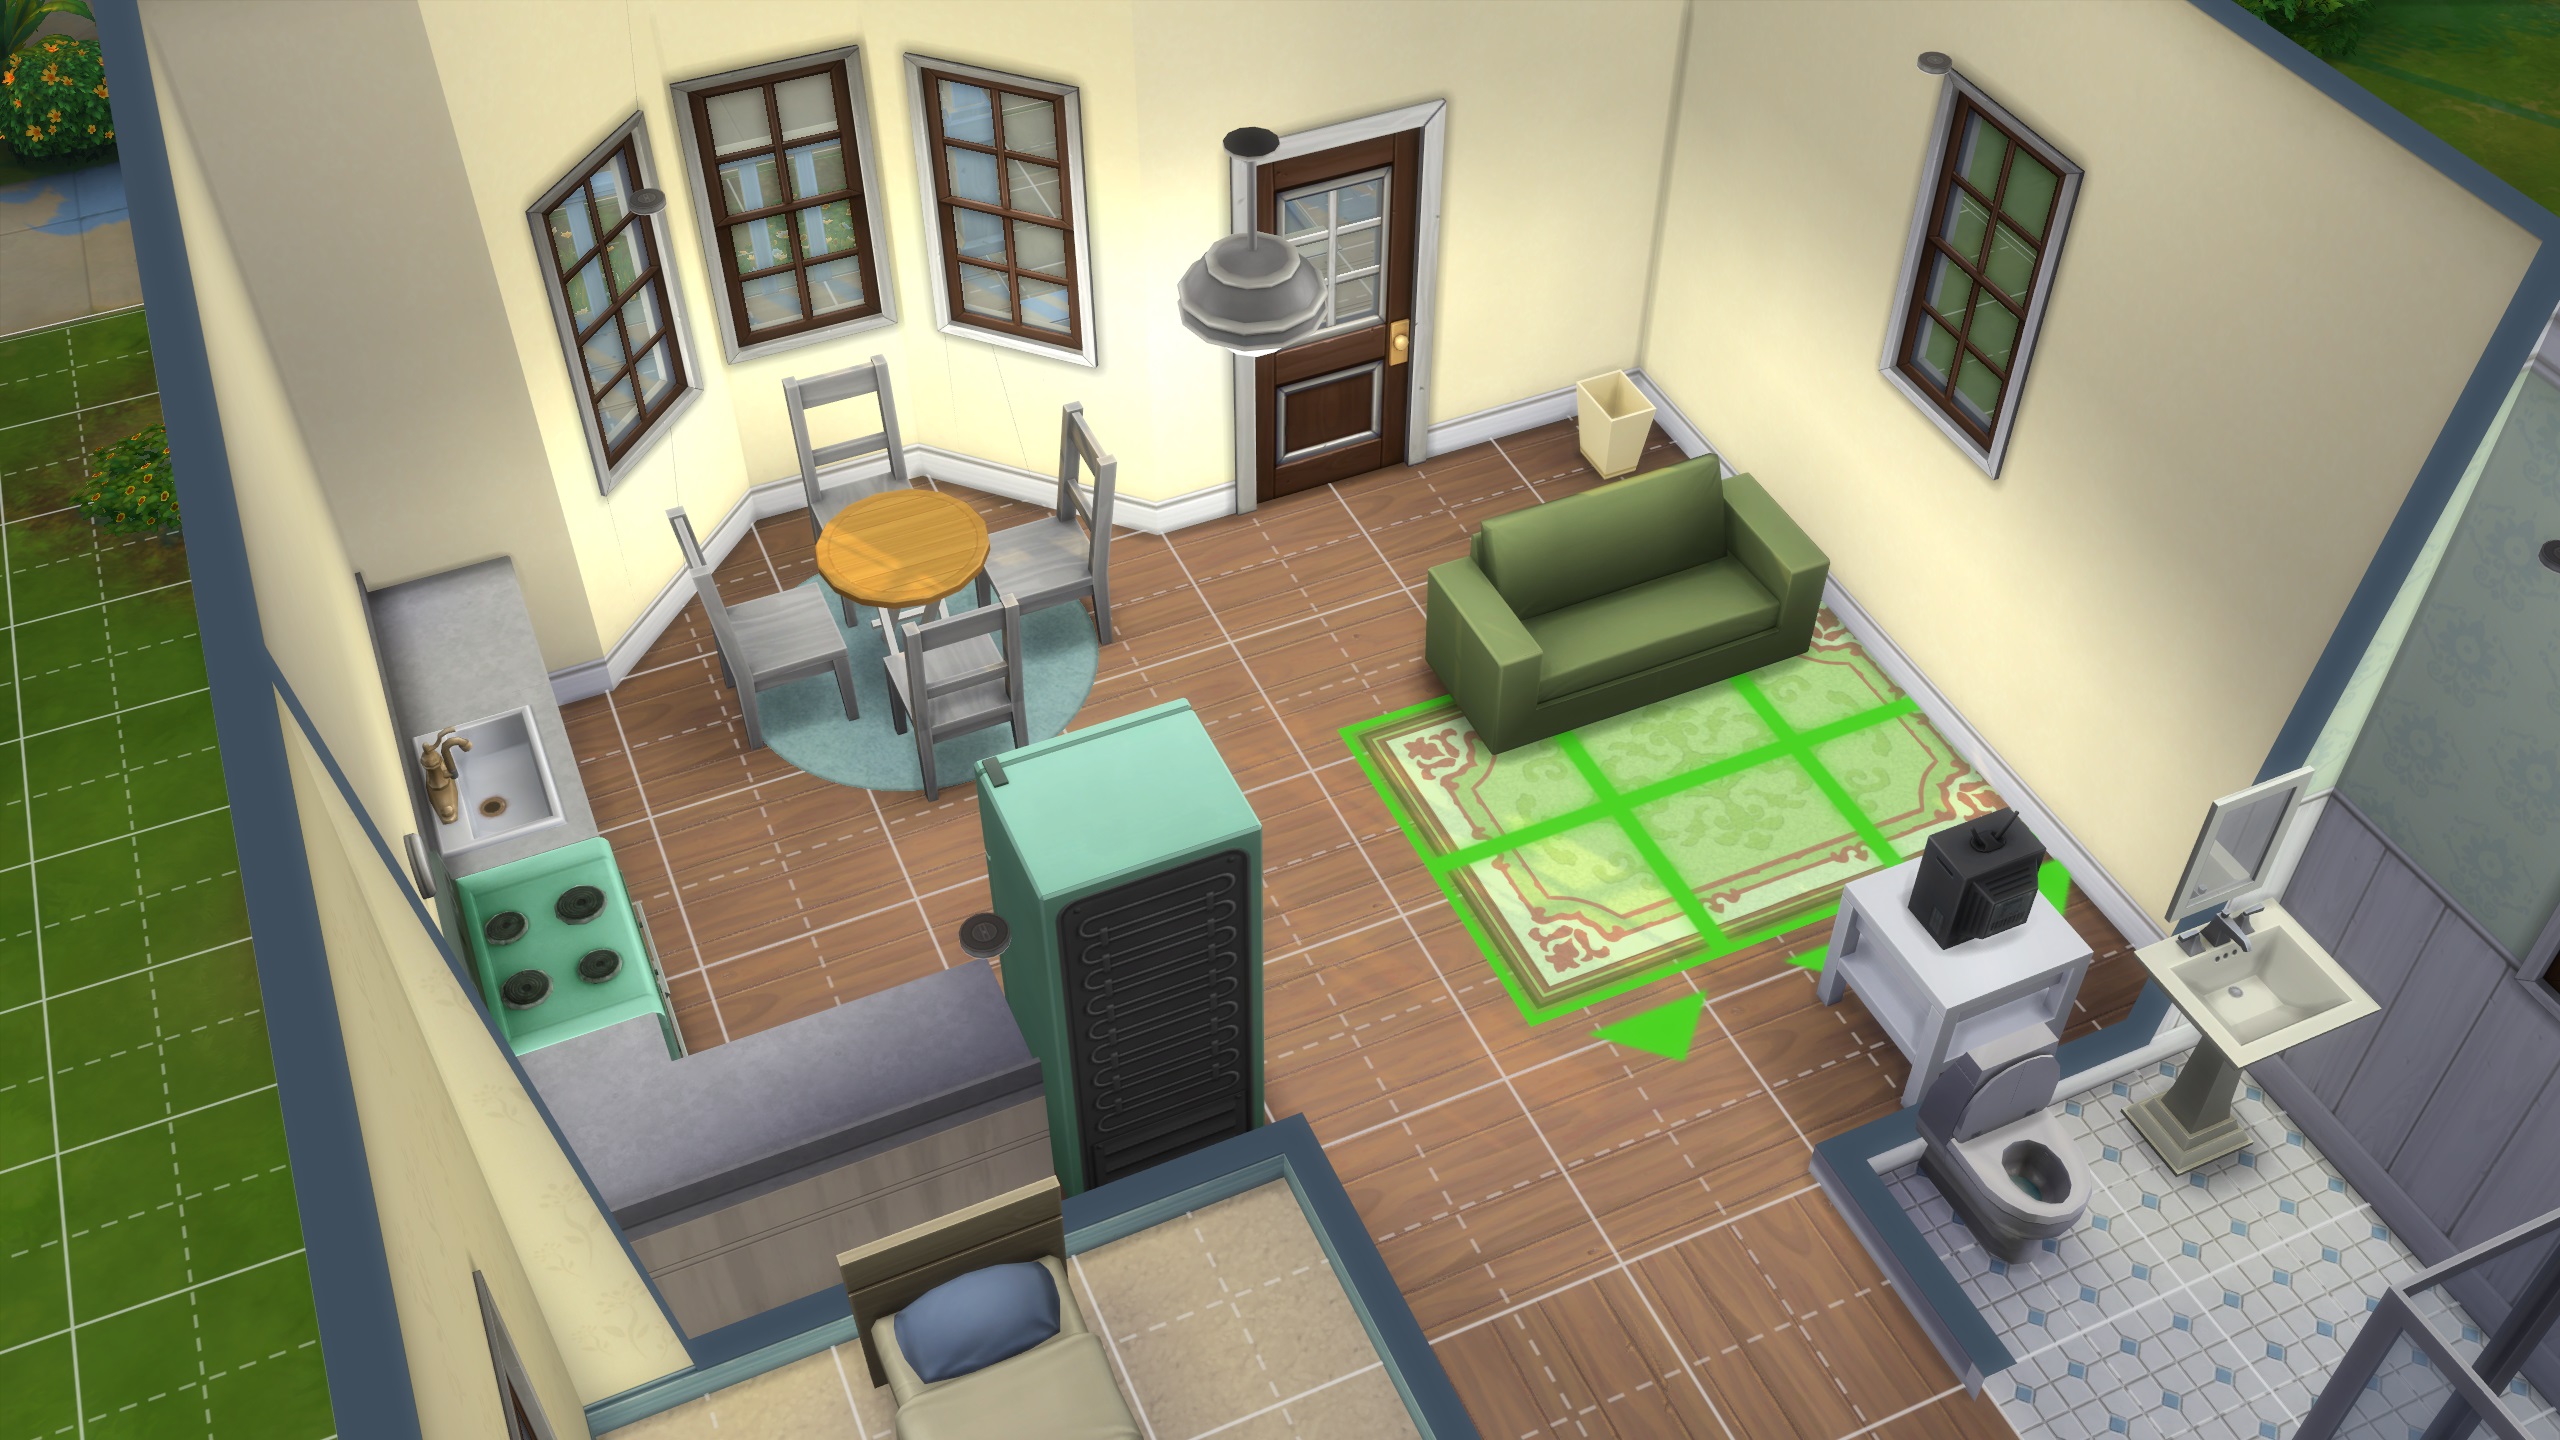 The Sims 4 build tips - In build mode, a rug being placed in a small living room.